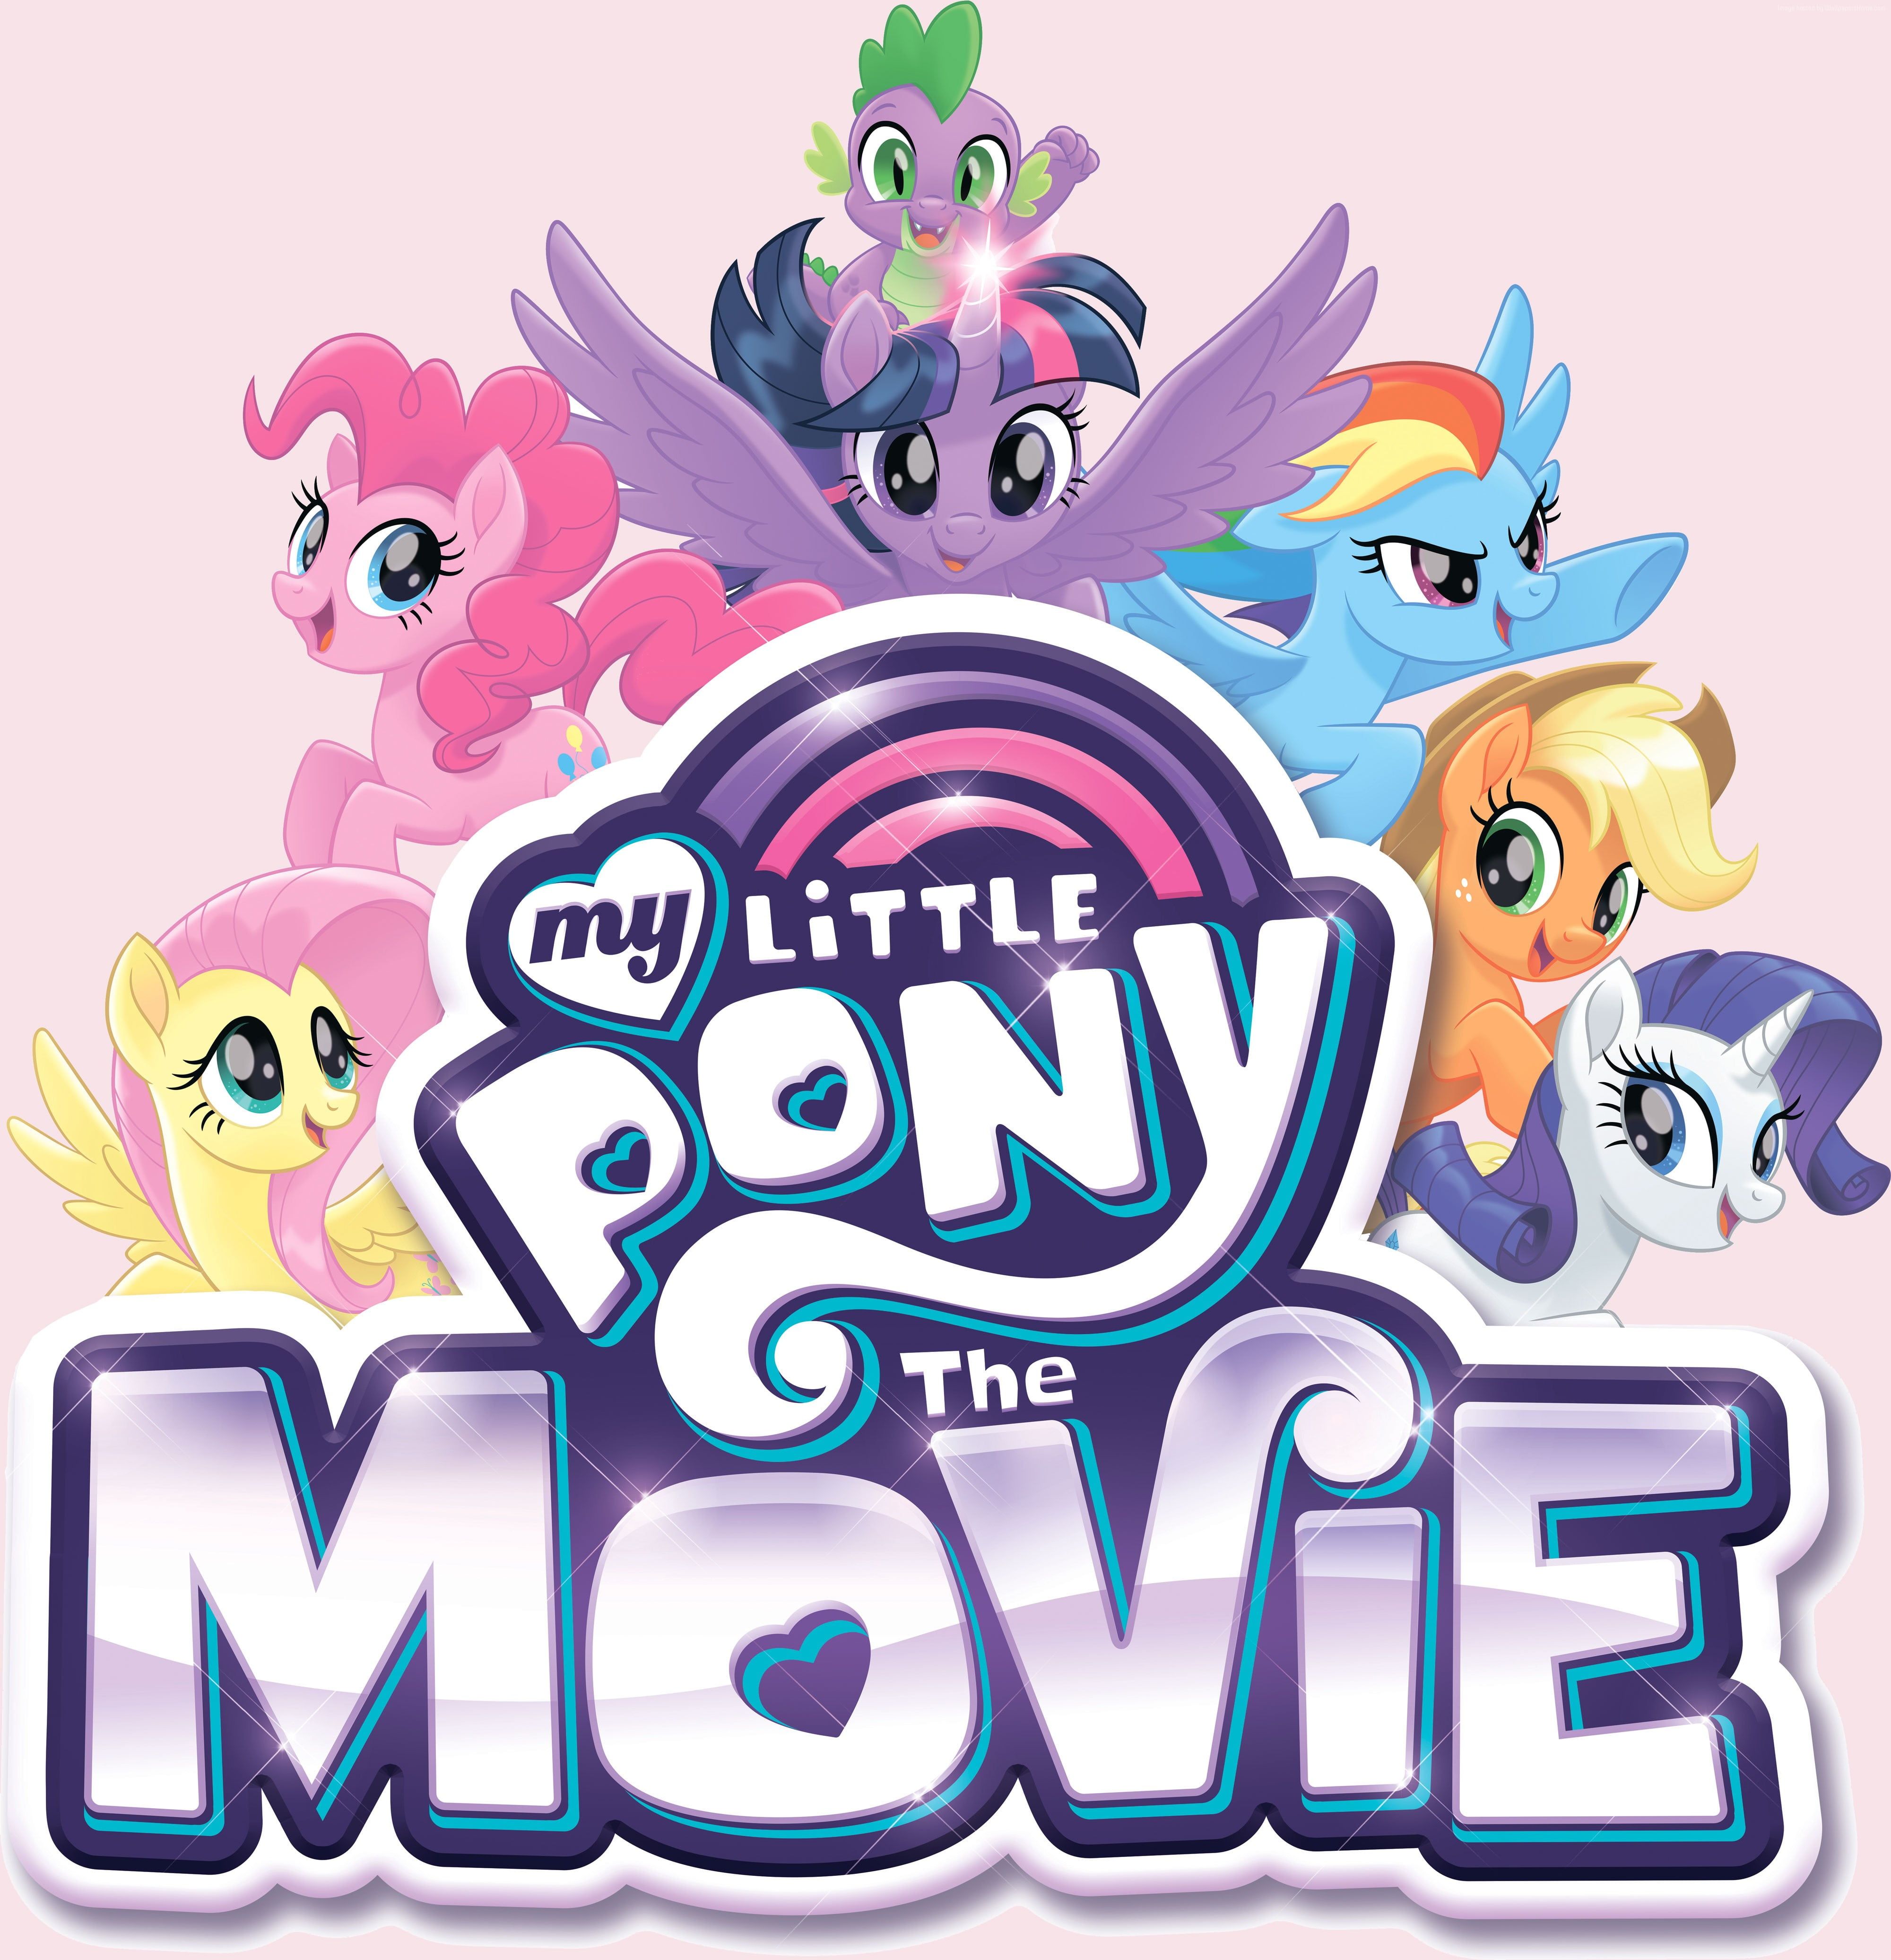 iPhone Wallpapers  My Little Pony Friendship is Magic Photo 30219386   Fanpop